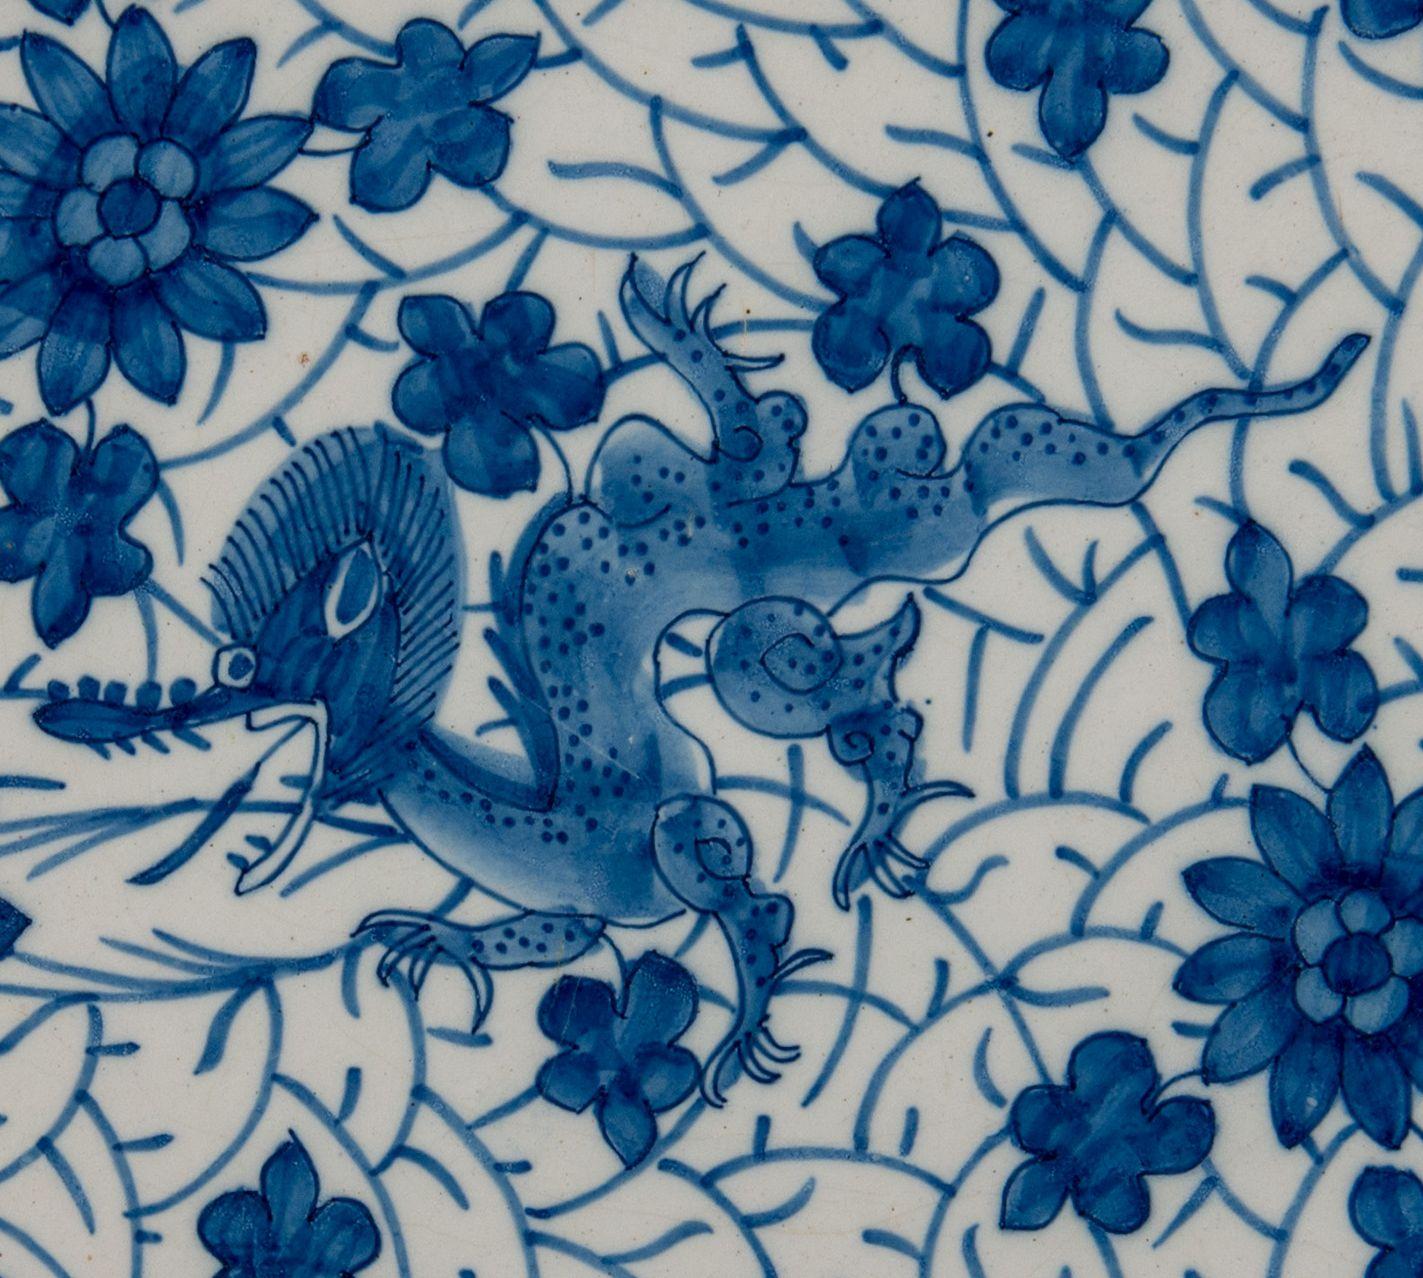 Blue and white dragon dish. Delft, 1722-1757

The Greek A pottery Mark: AIK, period J van der Kool (1722-1757)
Dish with blue and white decoration of a dragon on a dense ground of flowers and foliage. The well is undecorated. The border is